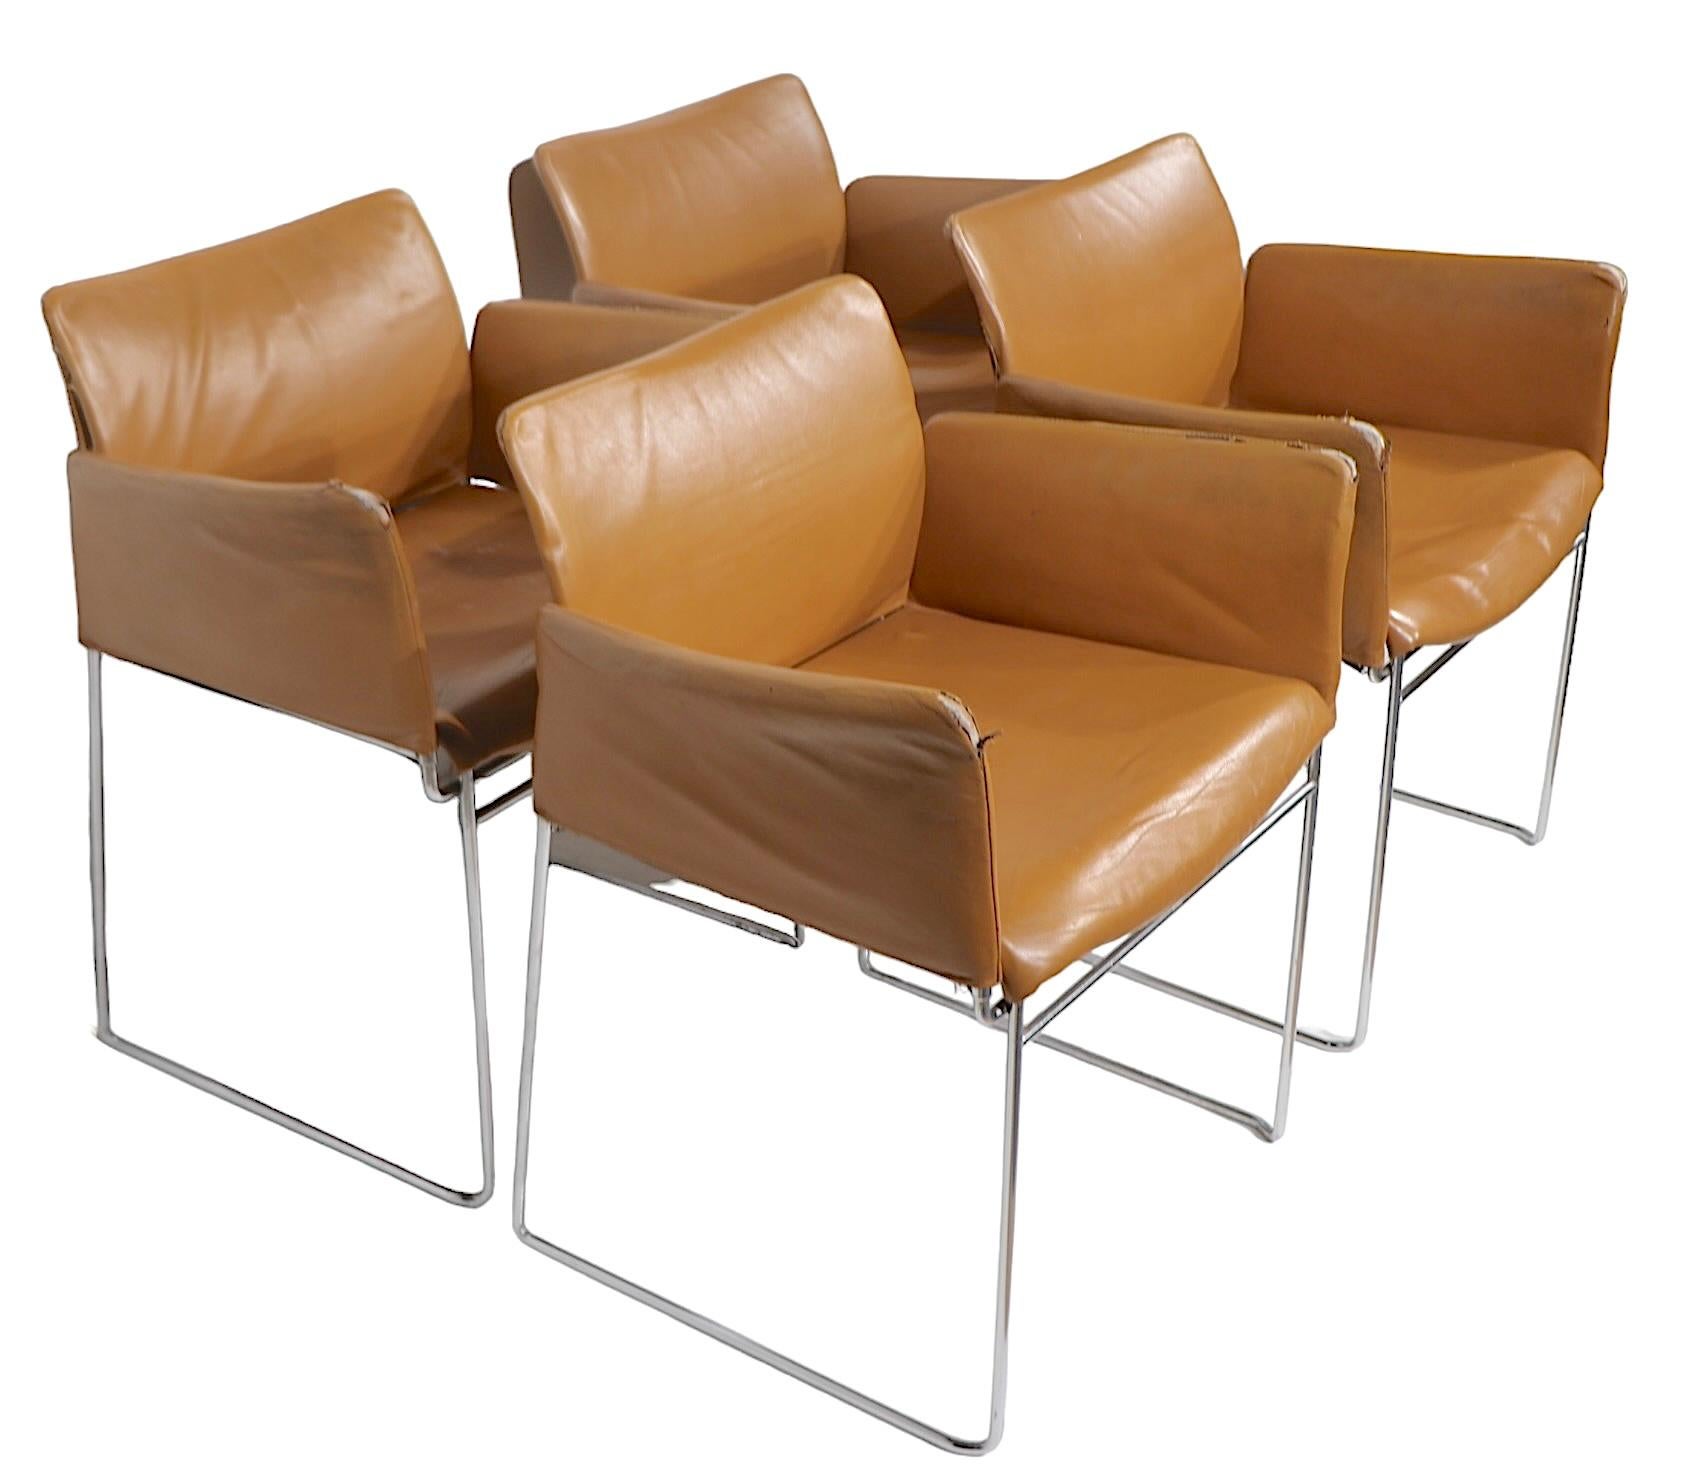 Italian Set of Four Chrome and Leather Dining Chairs by Gavina c 1960/1980's For Sale